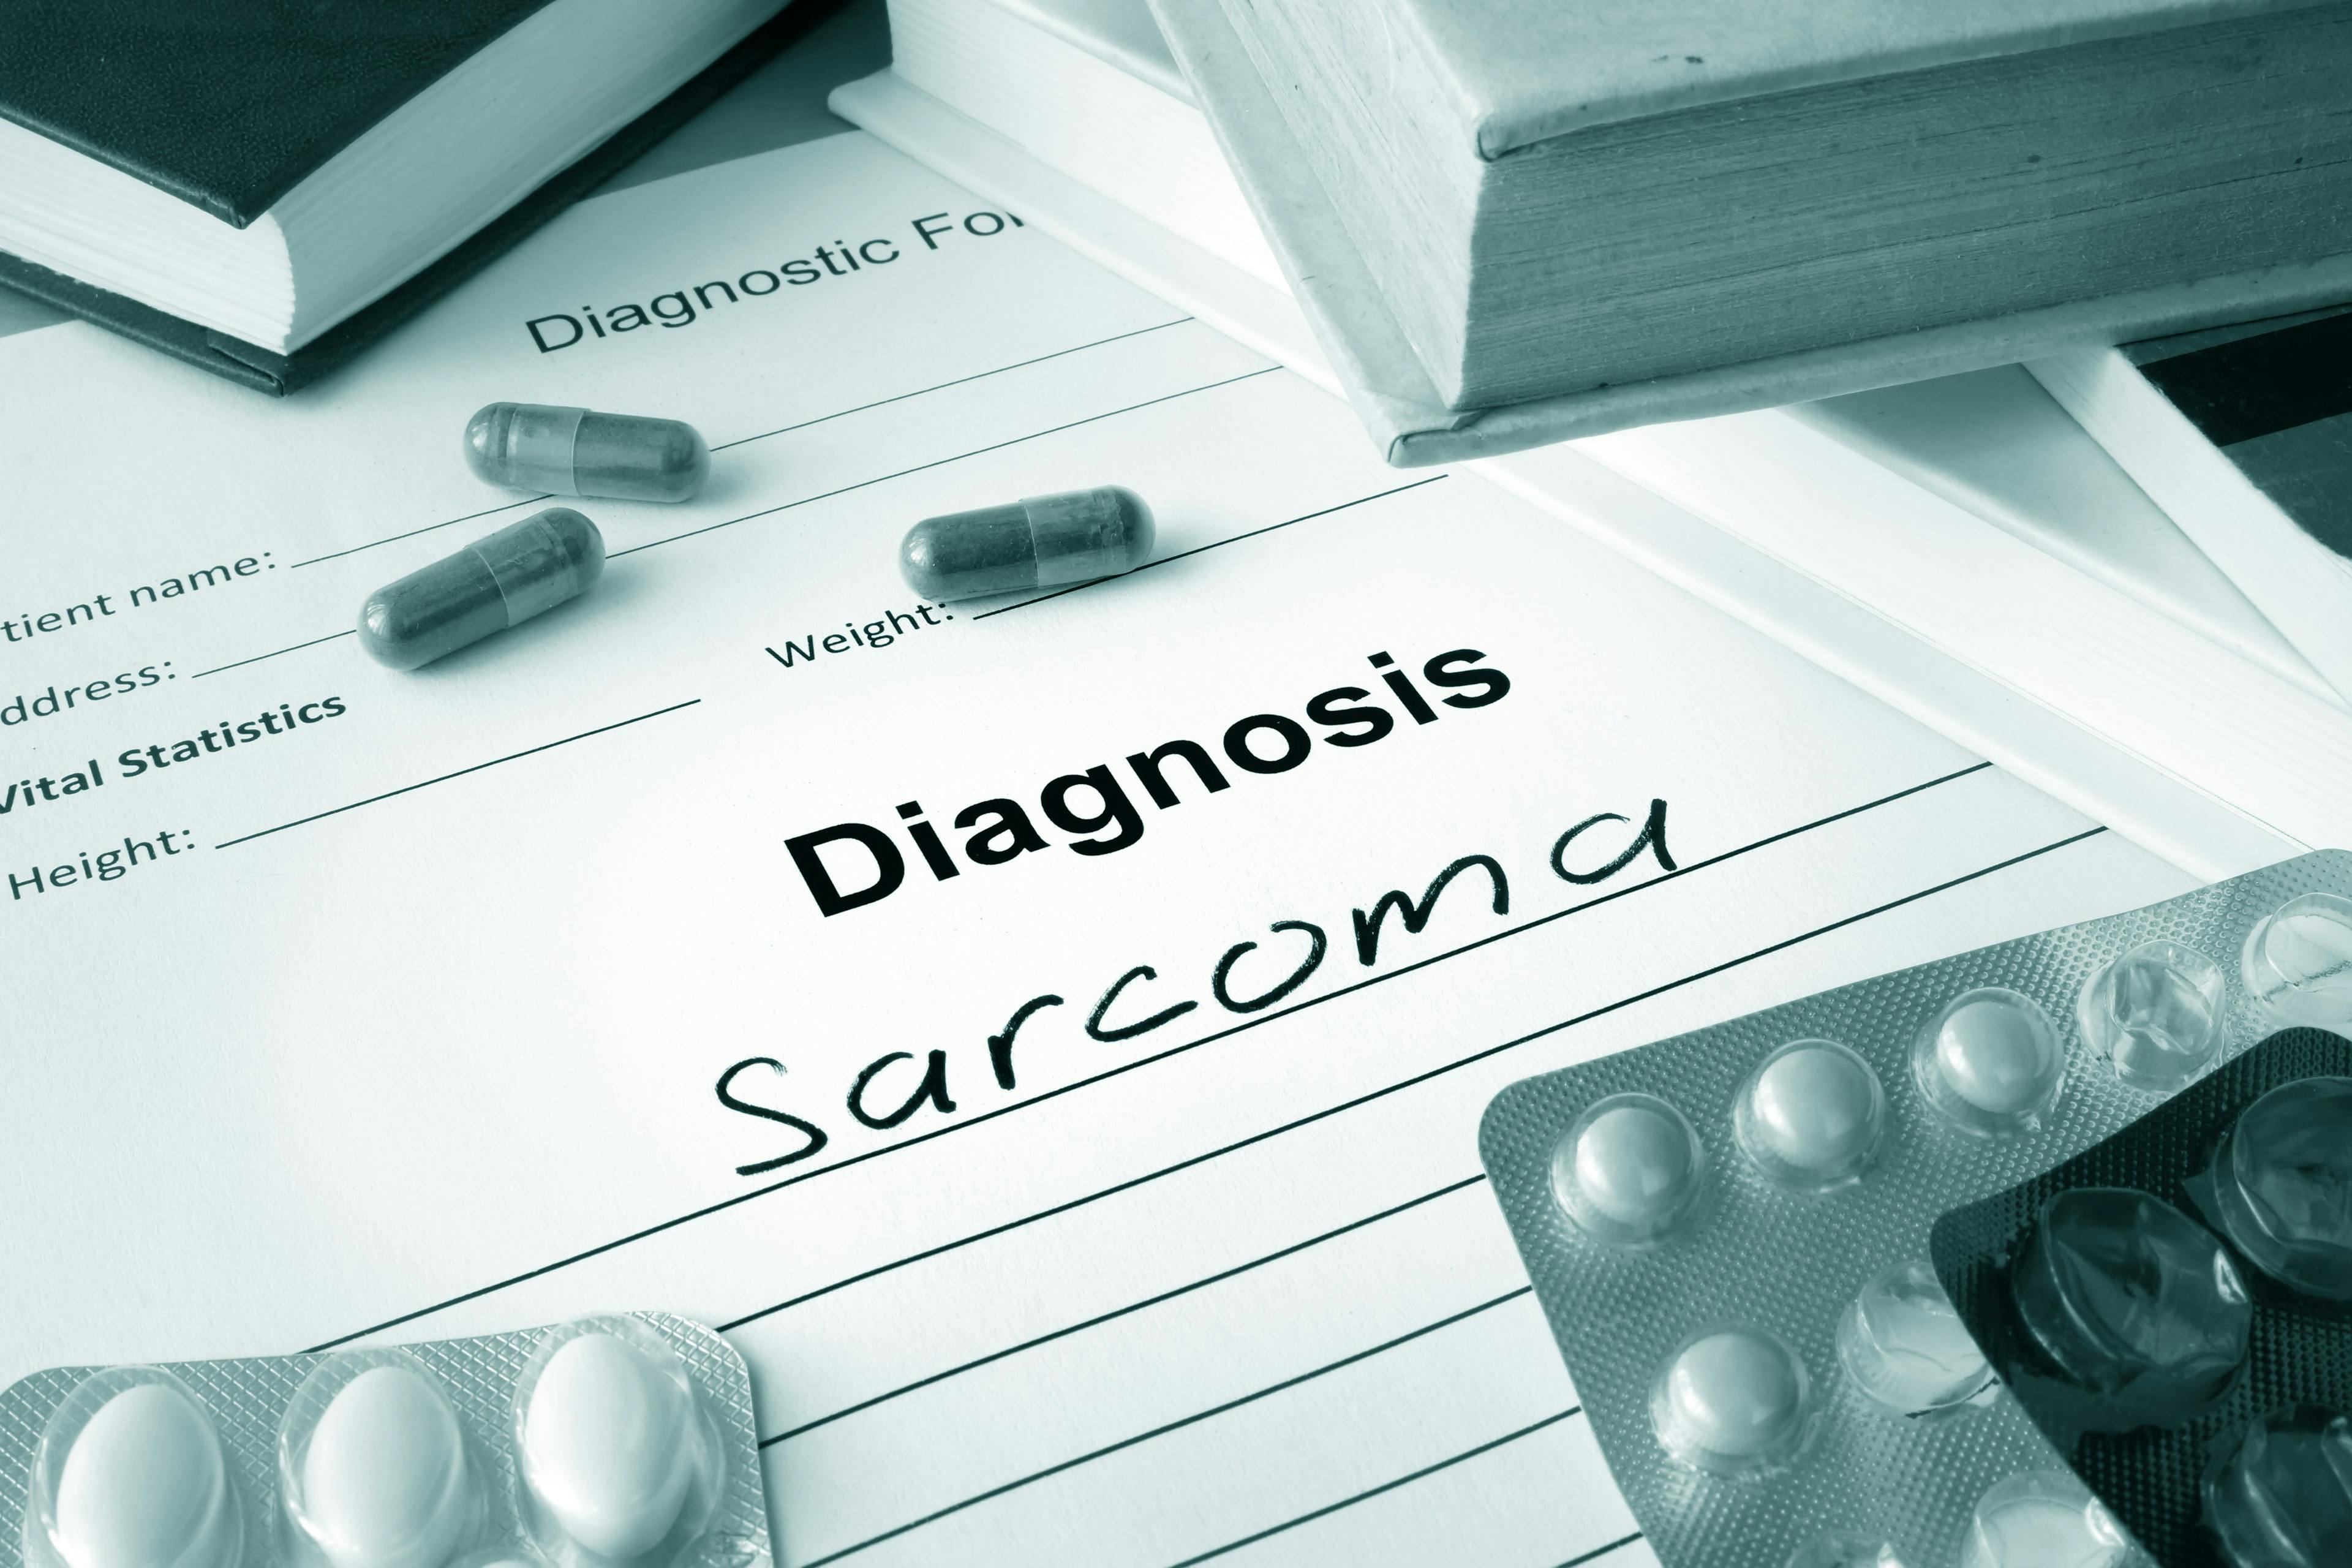 black-and-white image of a diagnosis pad with the words "Diagnosis sarcoma" written on it. Pills surround the writing